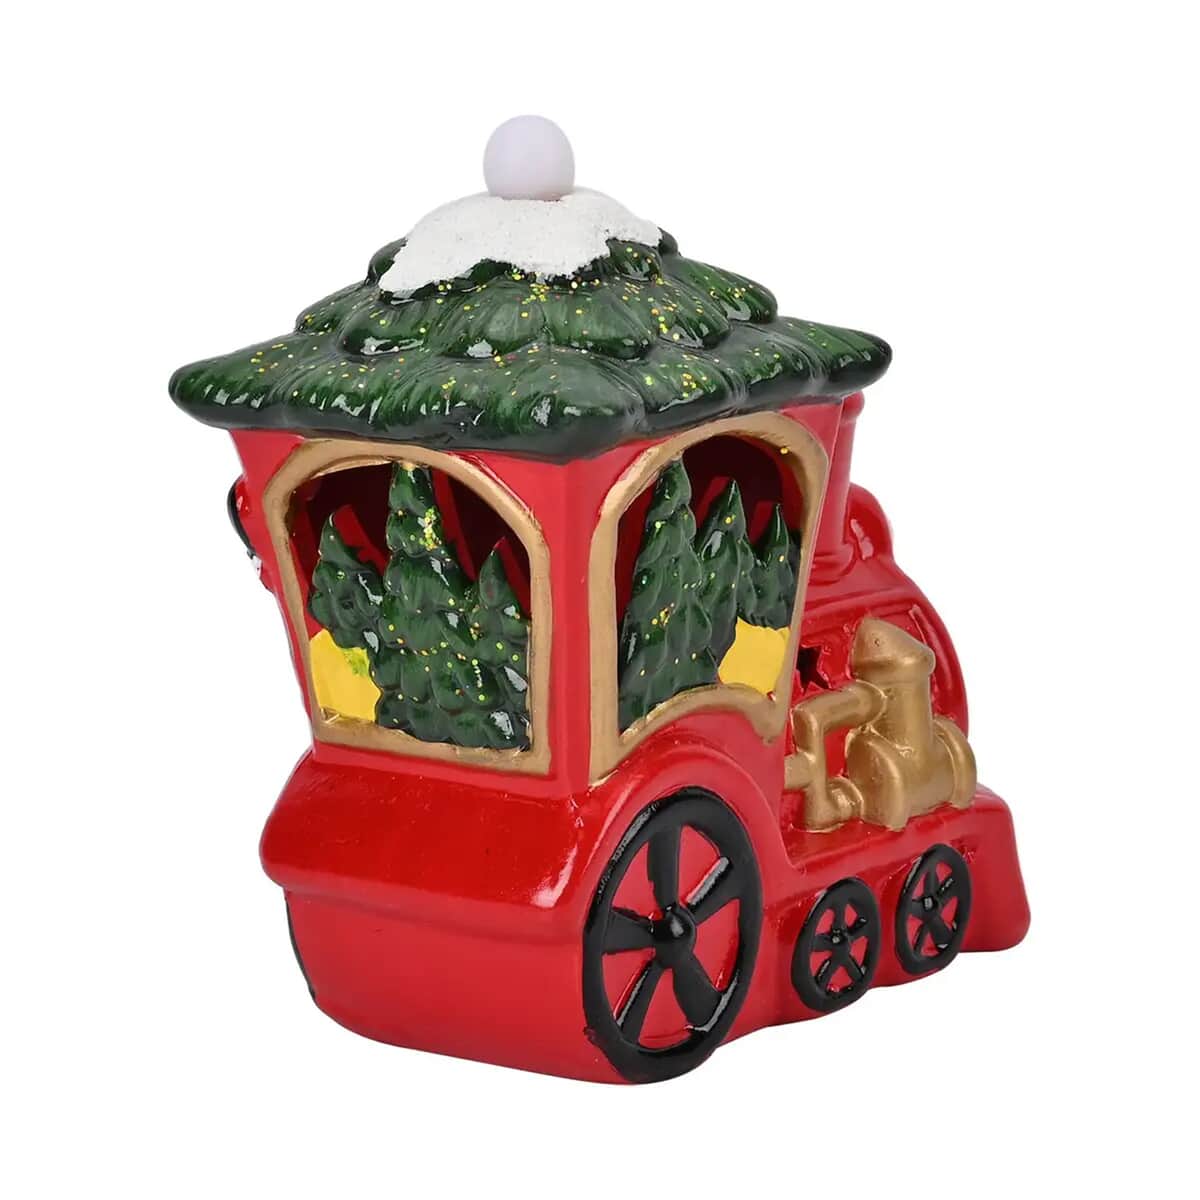 Ceramic Decoration Train and Santa Clause Shape with Led Light image number 6